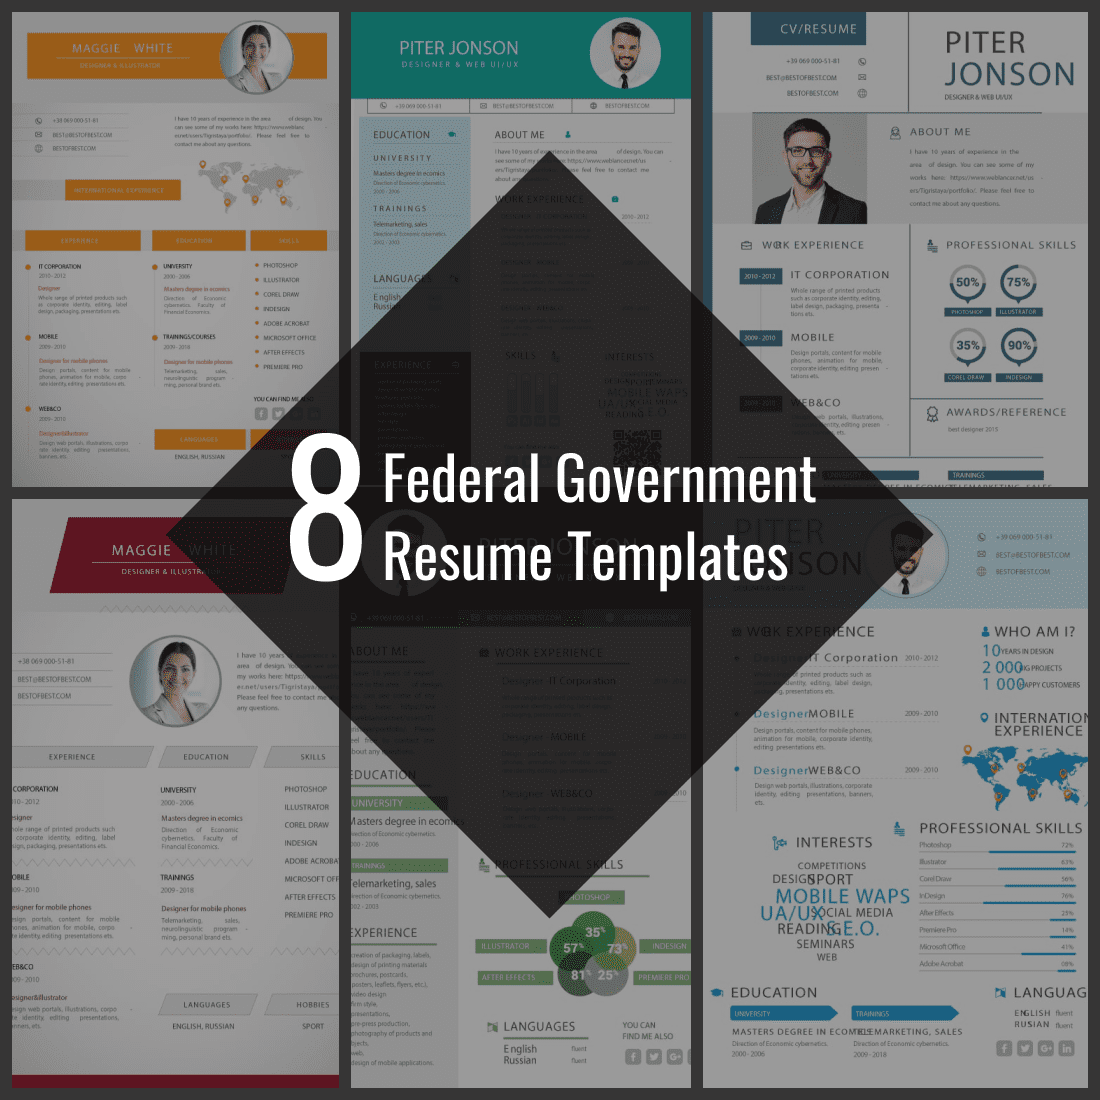 The 8 federal government resume templates.